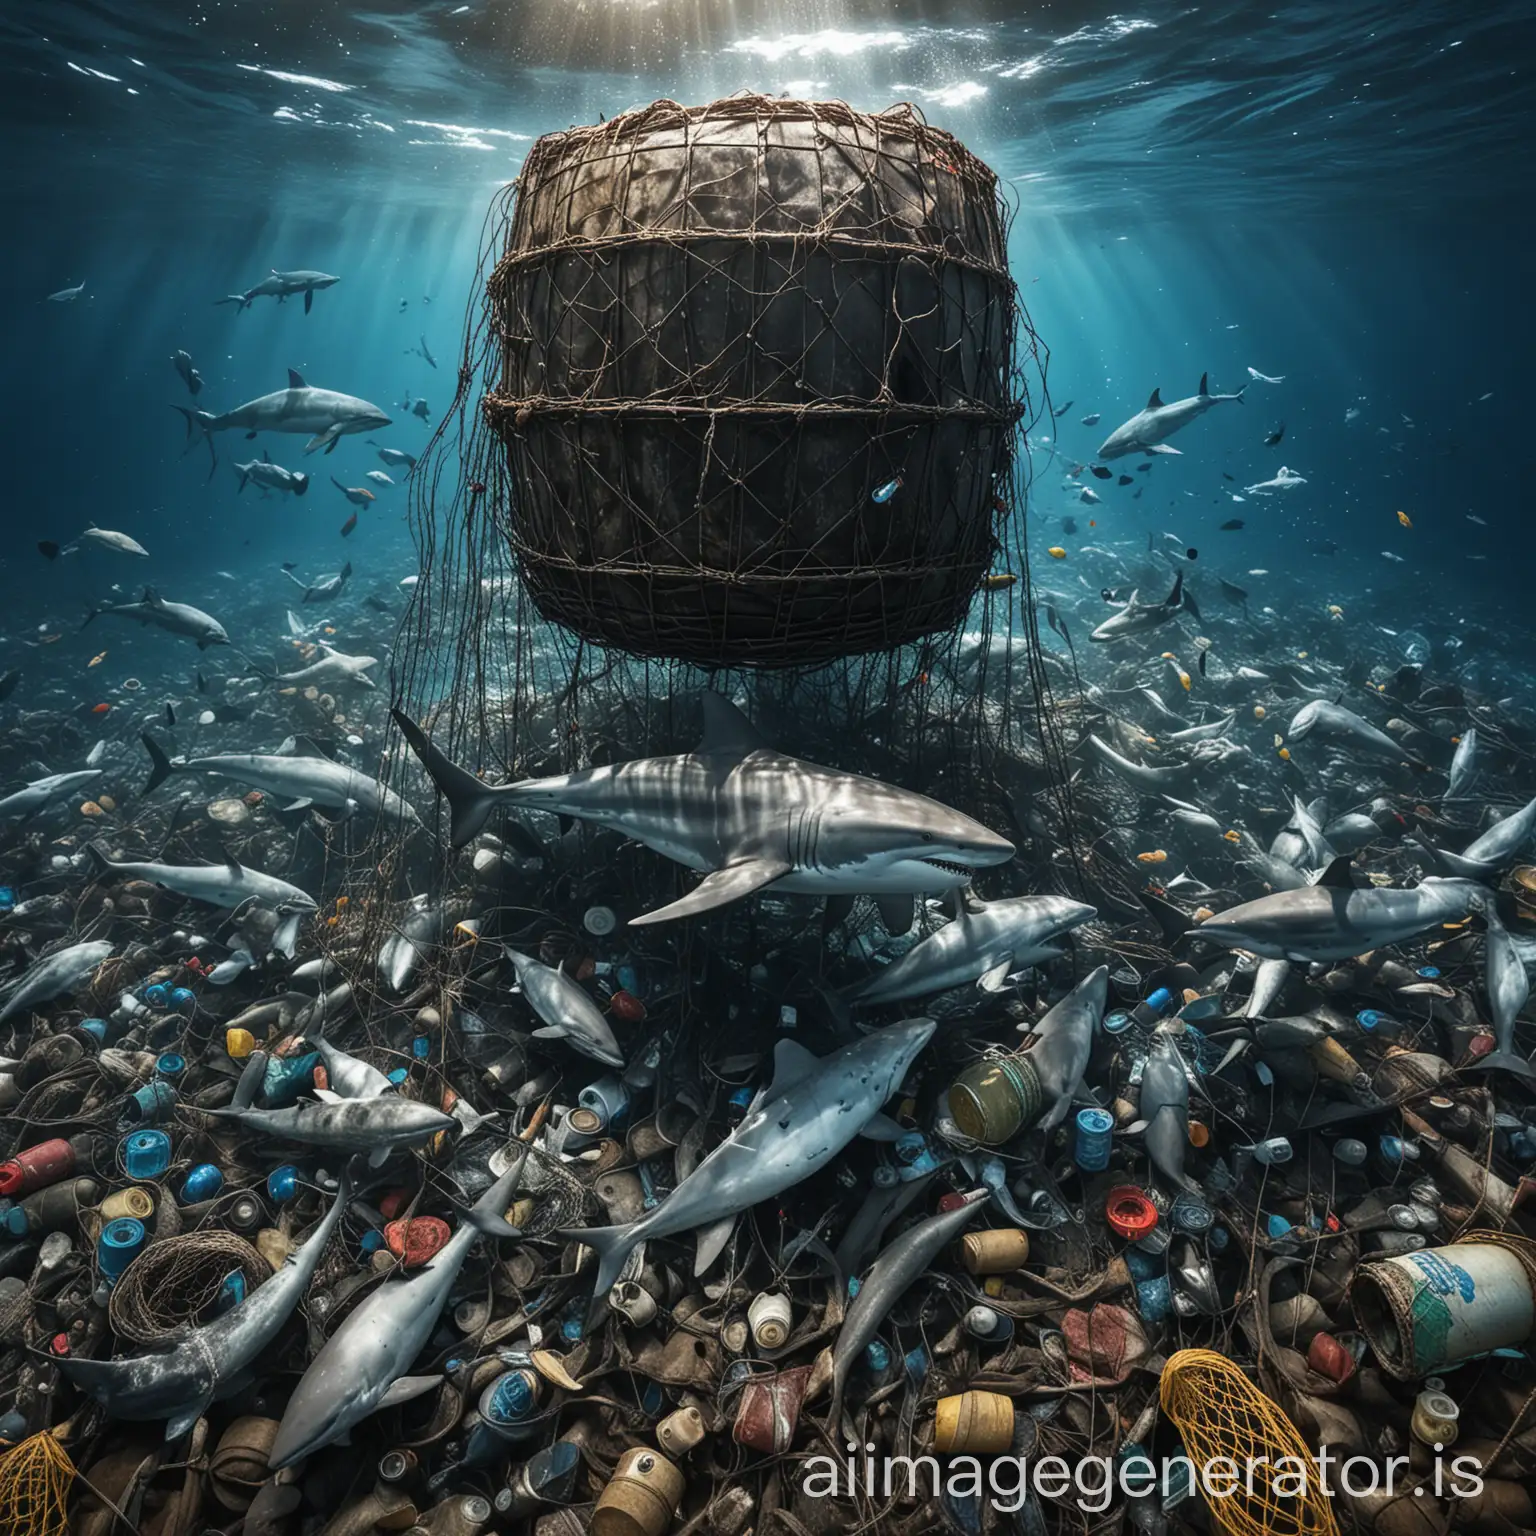 Sea, Underwater, Oil barrel, Shark, Dolphins, Fishing net, Plastic waste, high resolution, ultra realistic, real photography, perfect quality